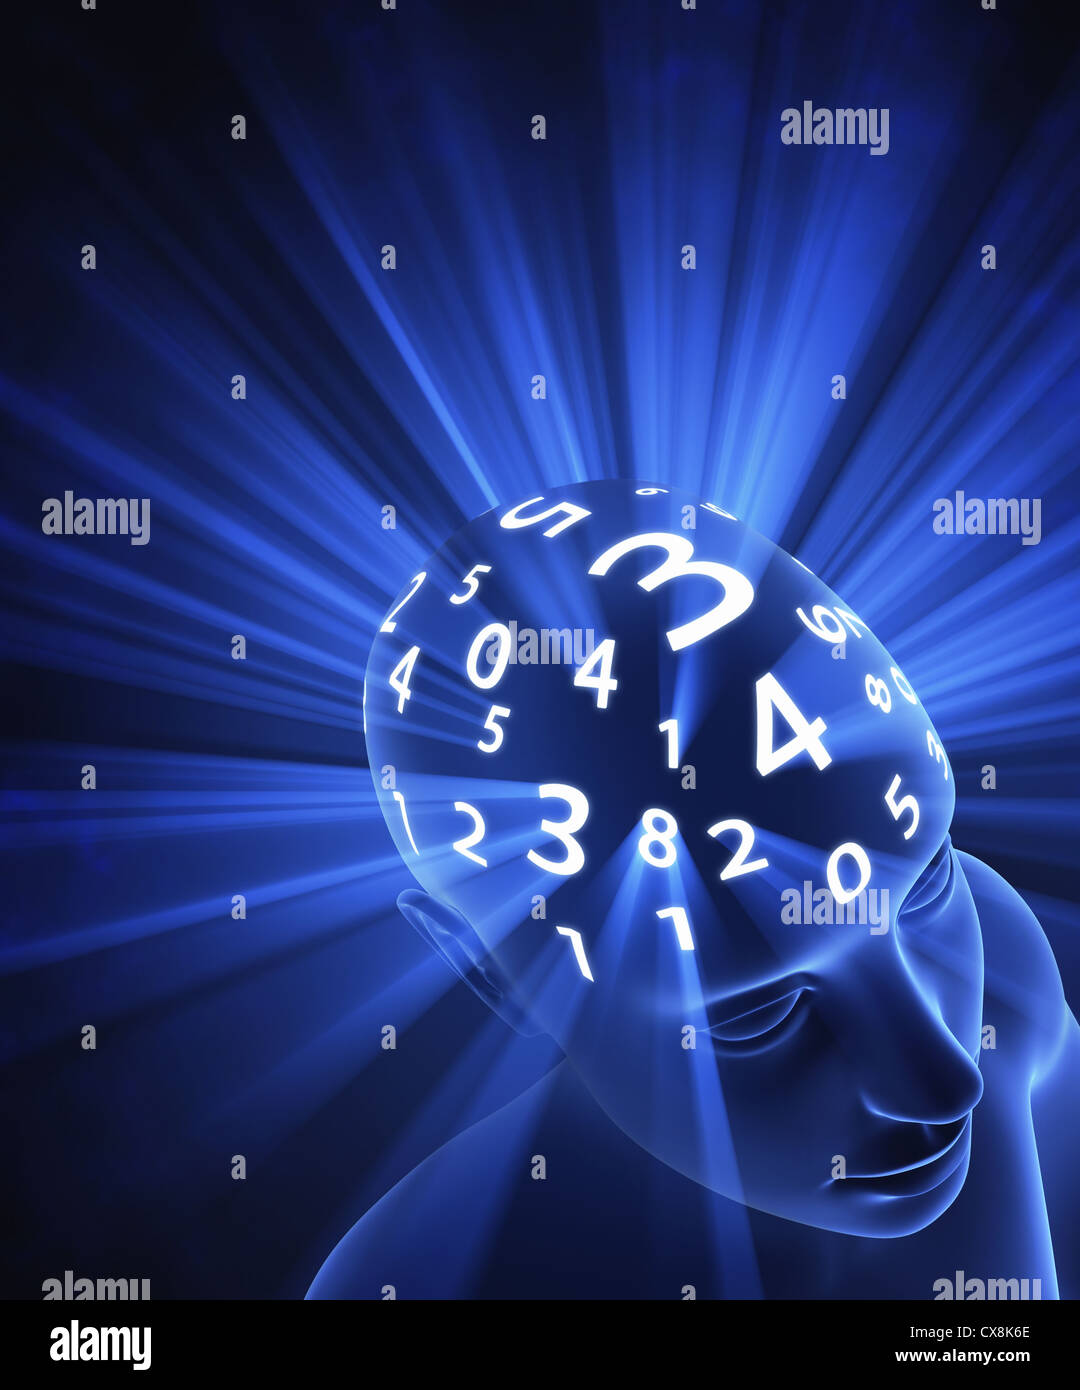 The head is thinking in numbers. The light represents the energy, the power of mind in the processing. Stock Photo